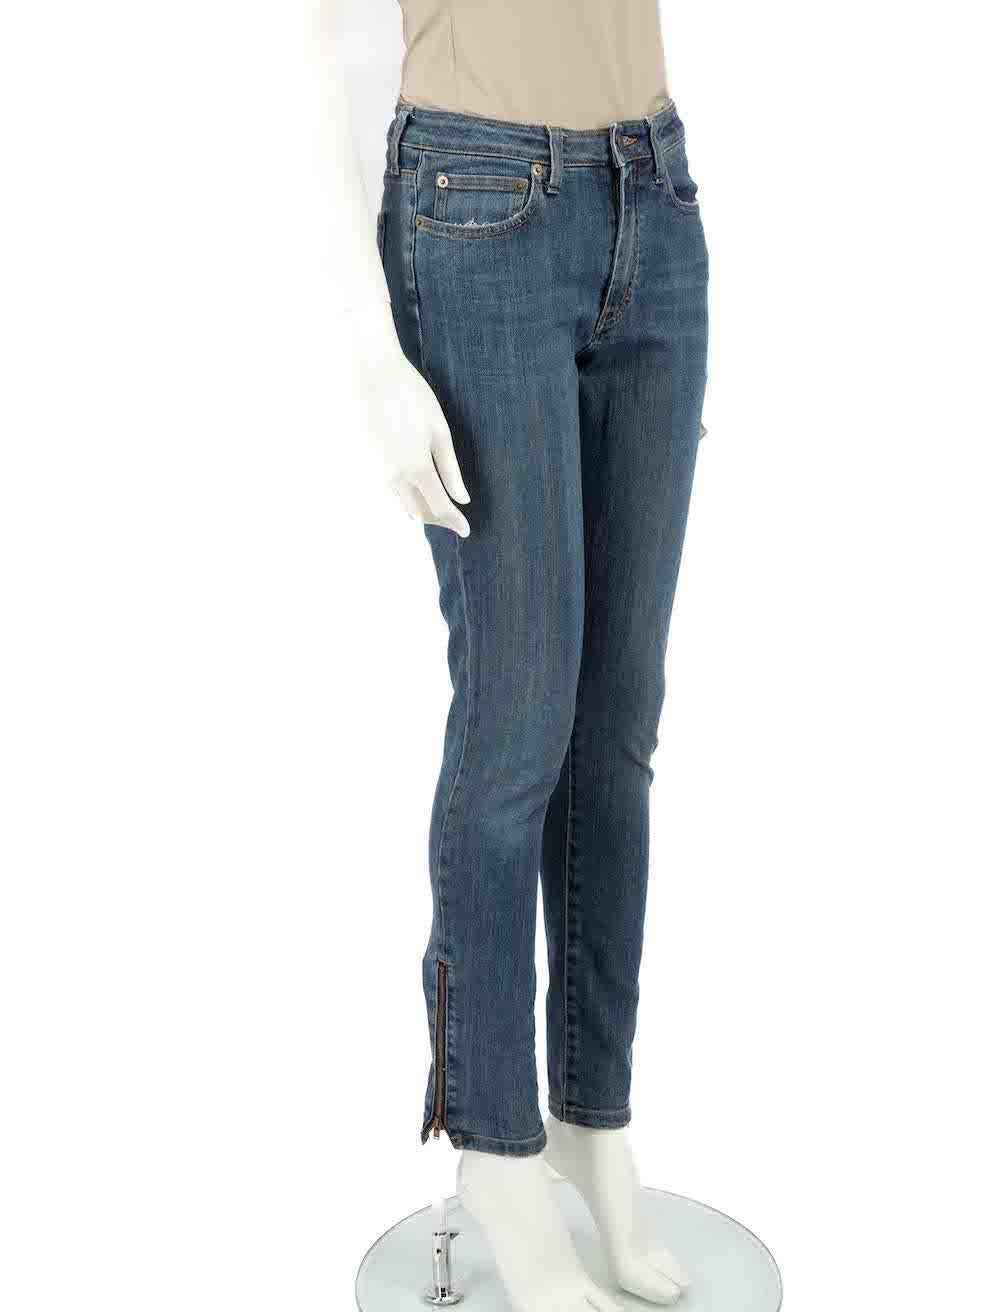 CONDITION is Very good. Minimal wear to jeans is evident. Minimal wear to the right leg with thinning of the weave at the seam on this used Saint Laurent designer resale item. Please note that these jeans have deliberately distressed